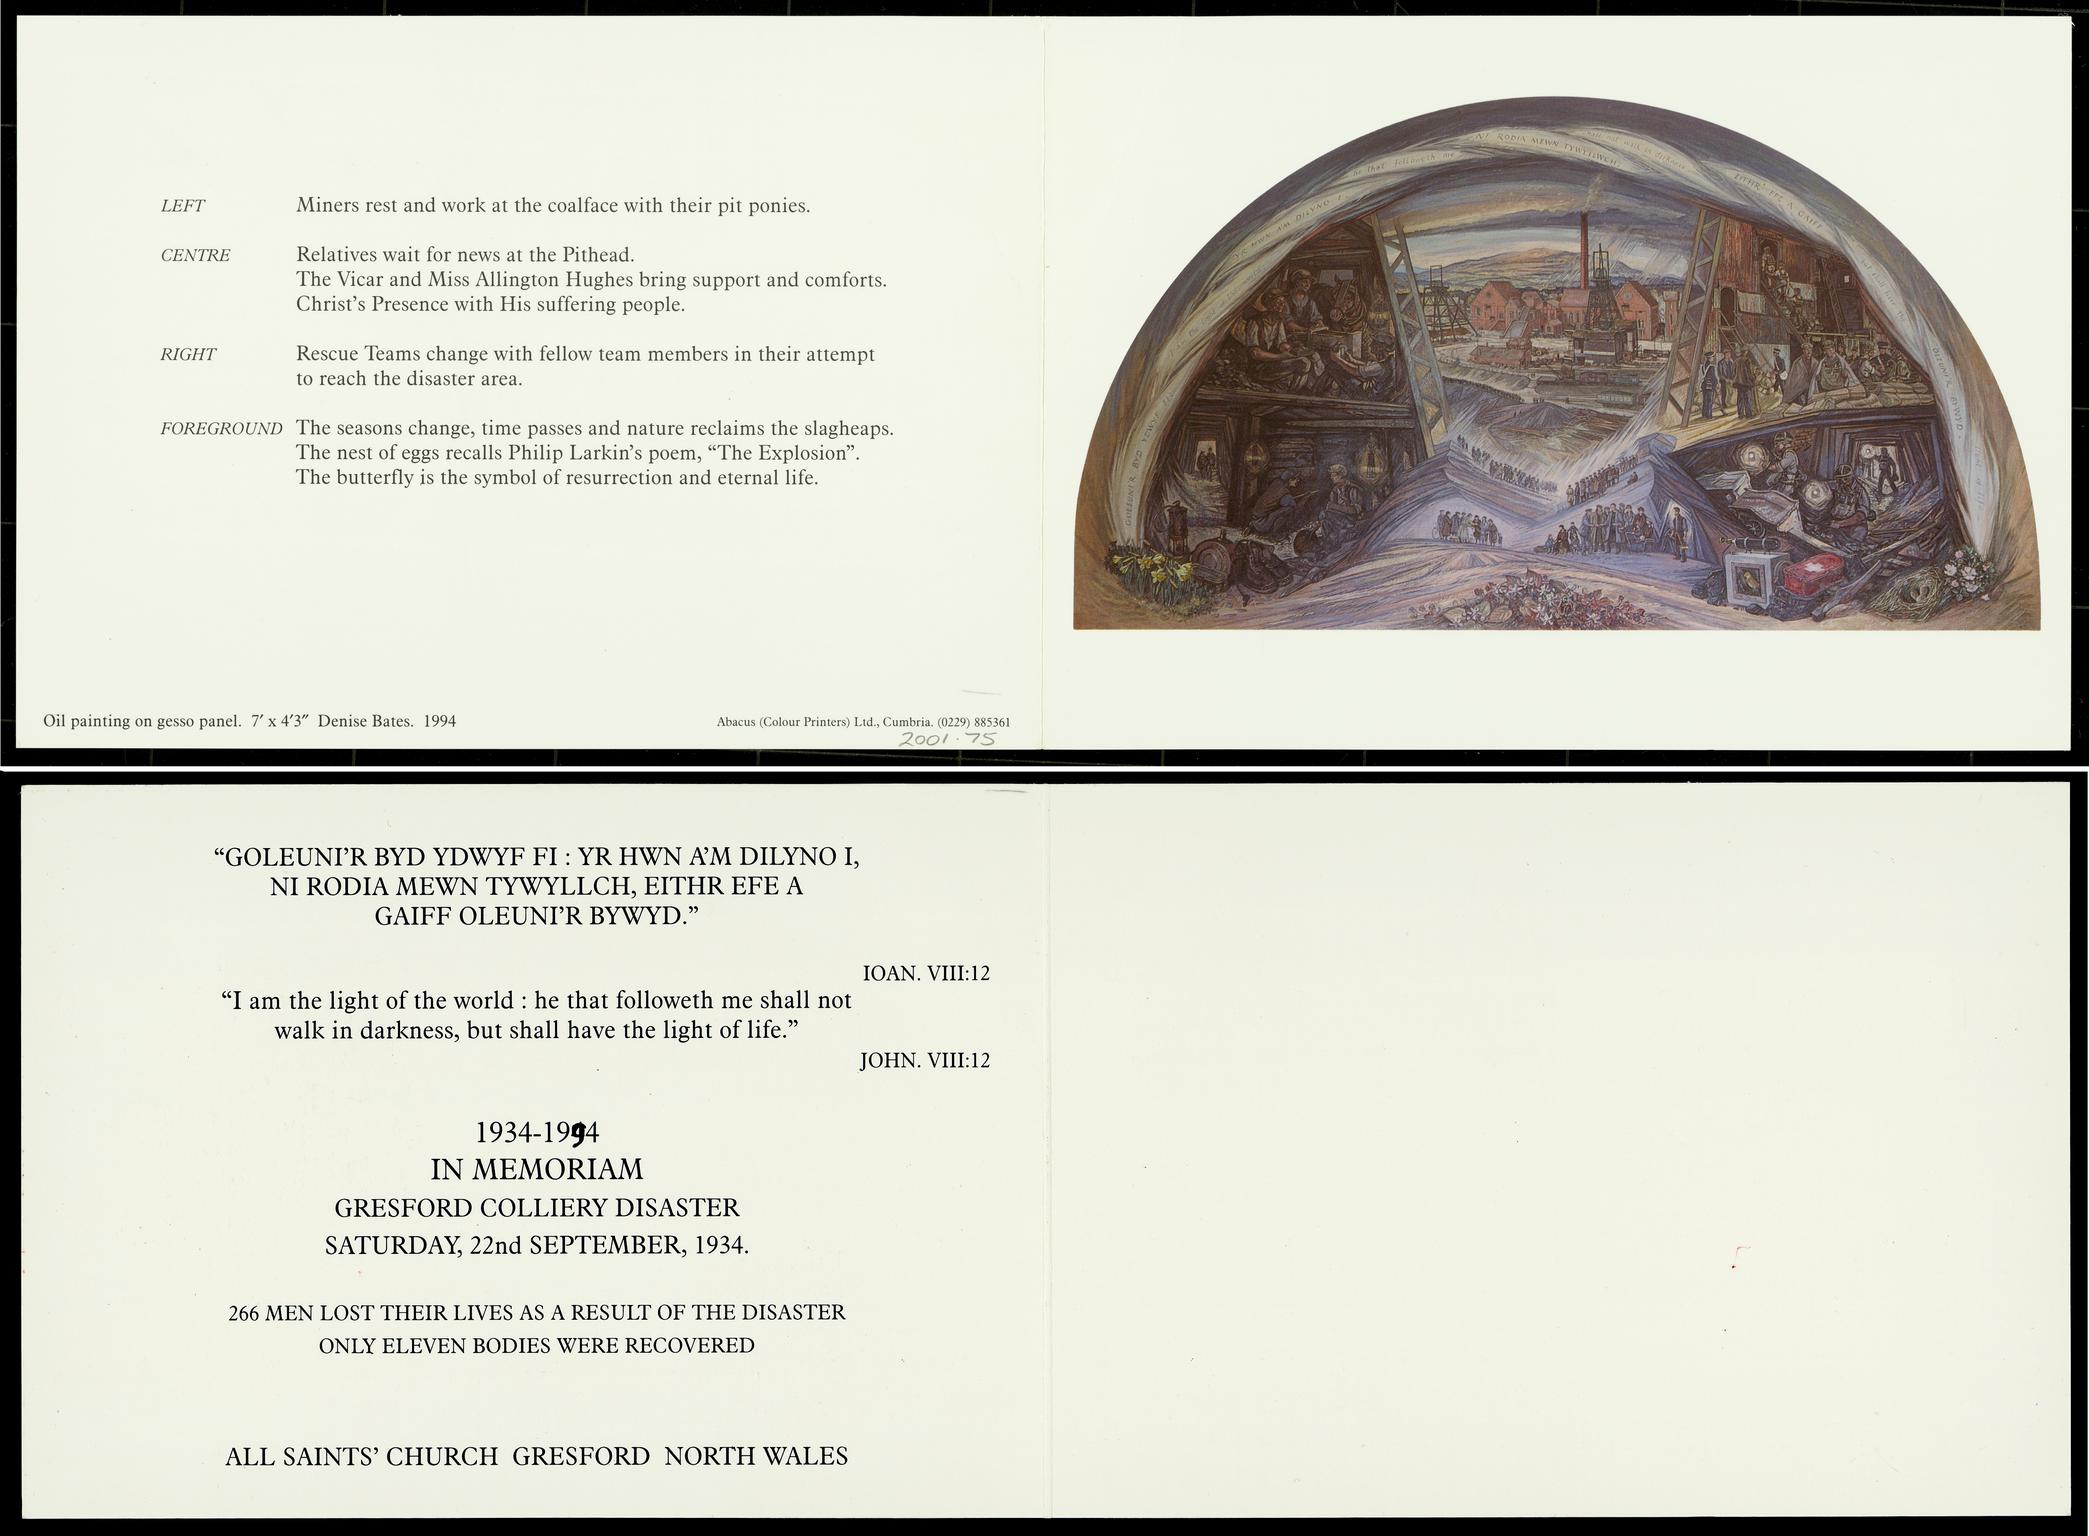 Gresford Colliery disaster memorial card